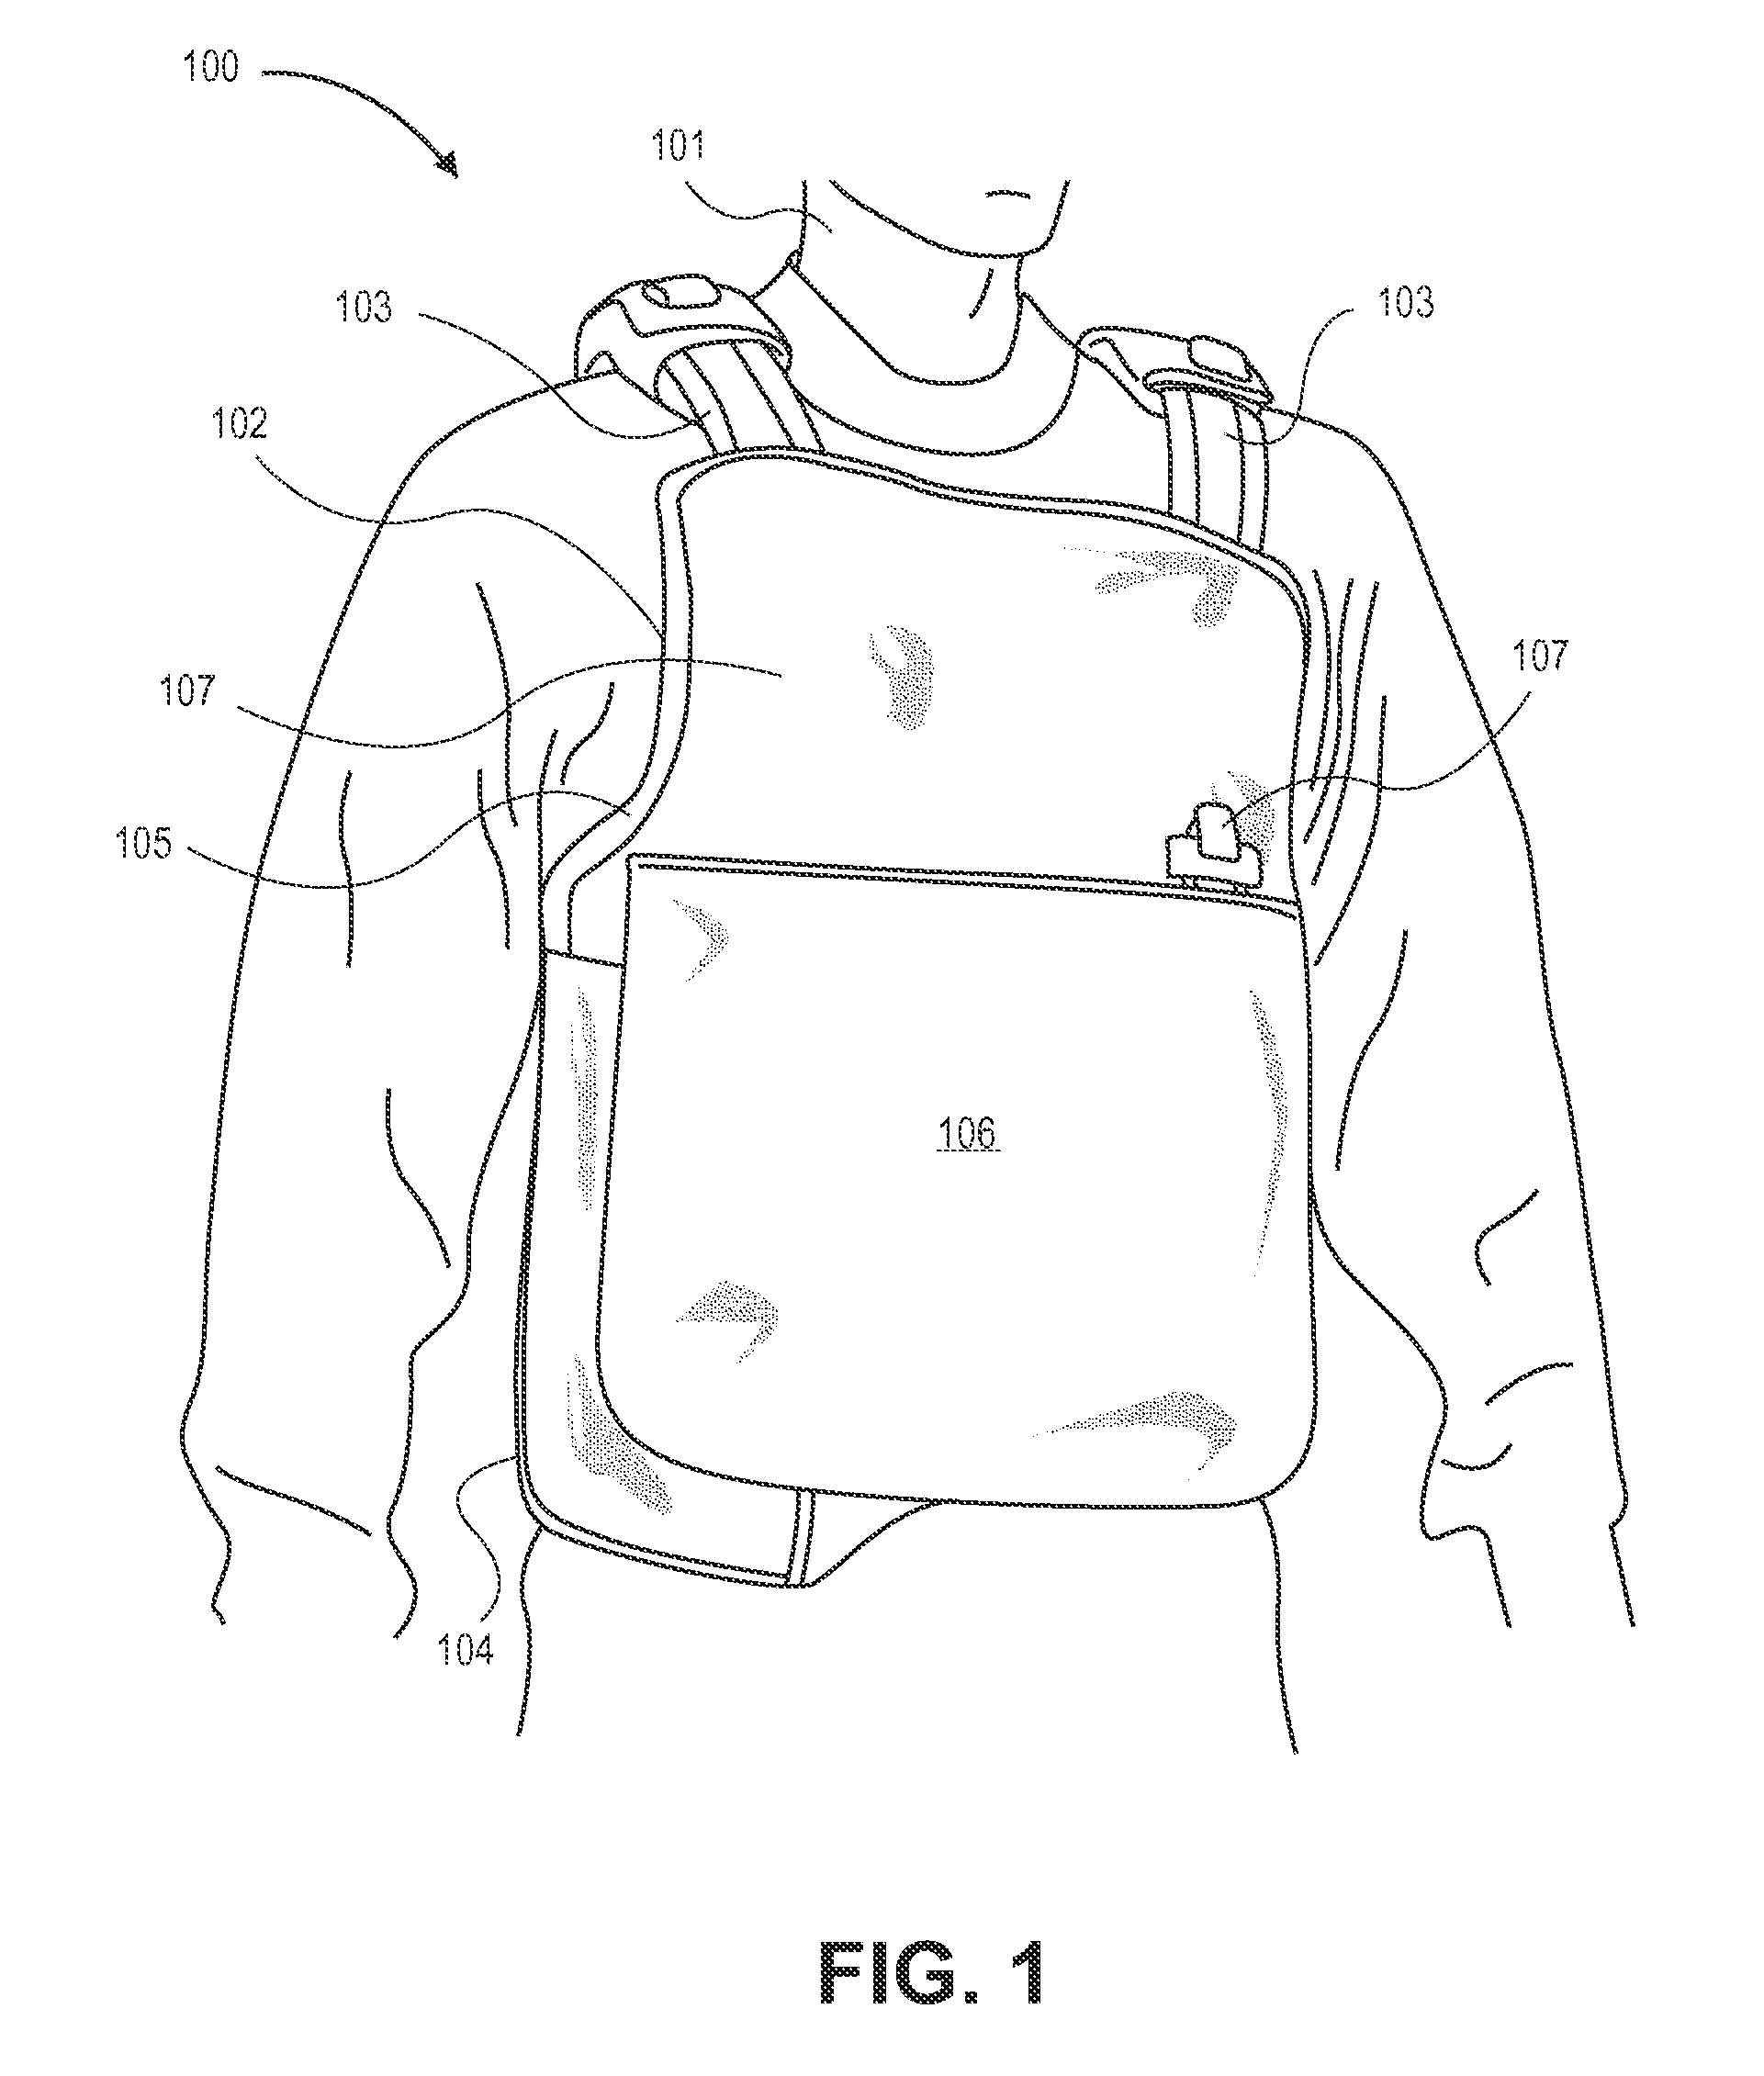 Armor vest with mechanical quick release mechanism